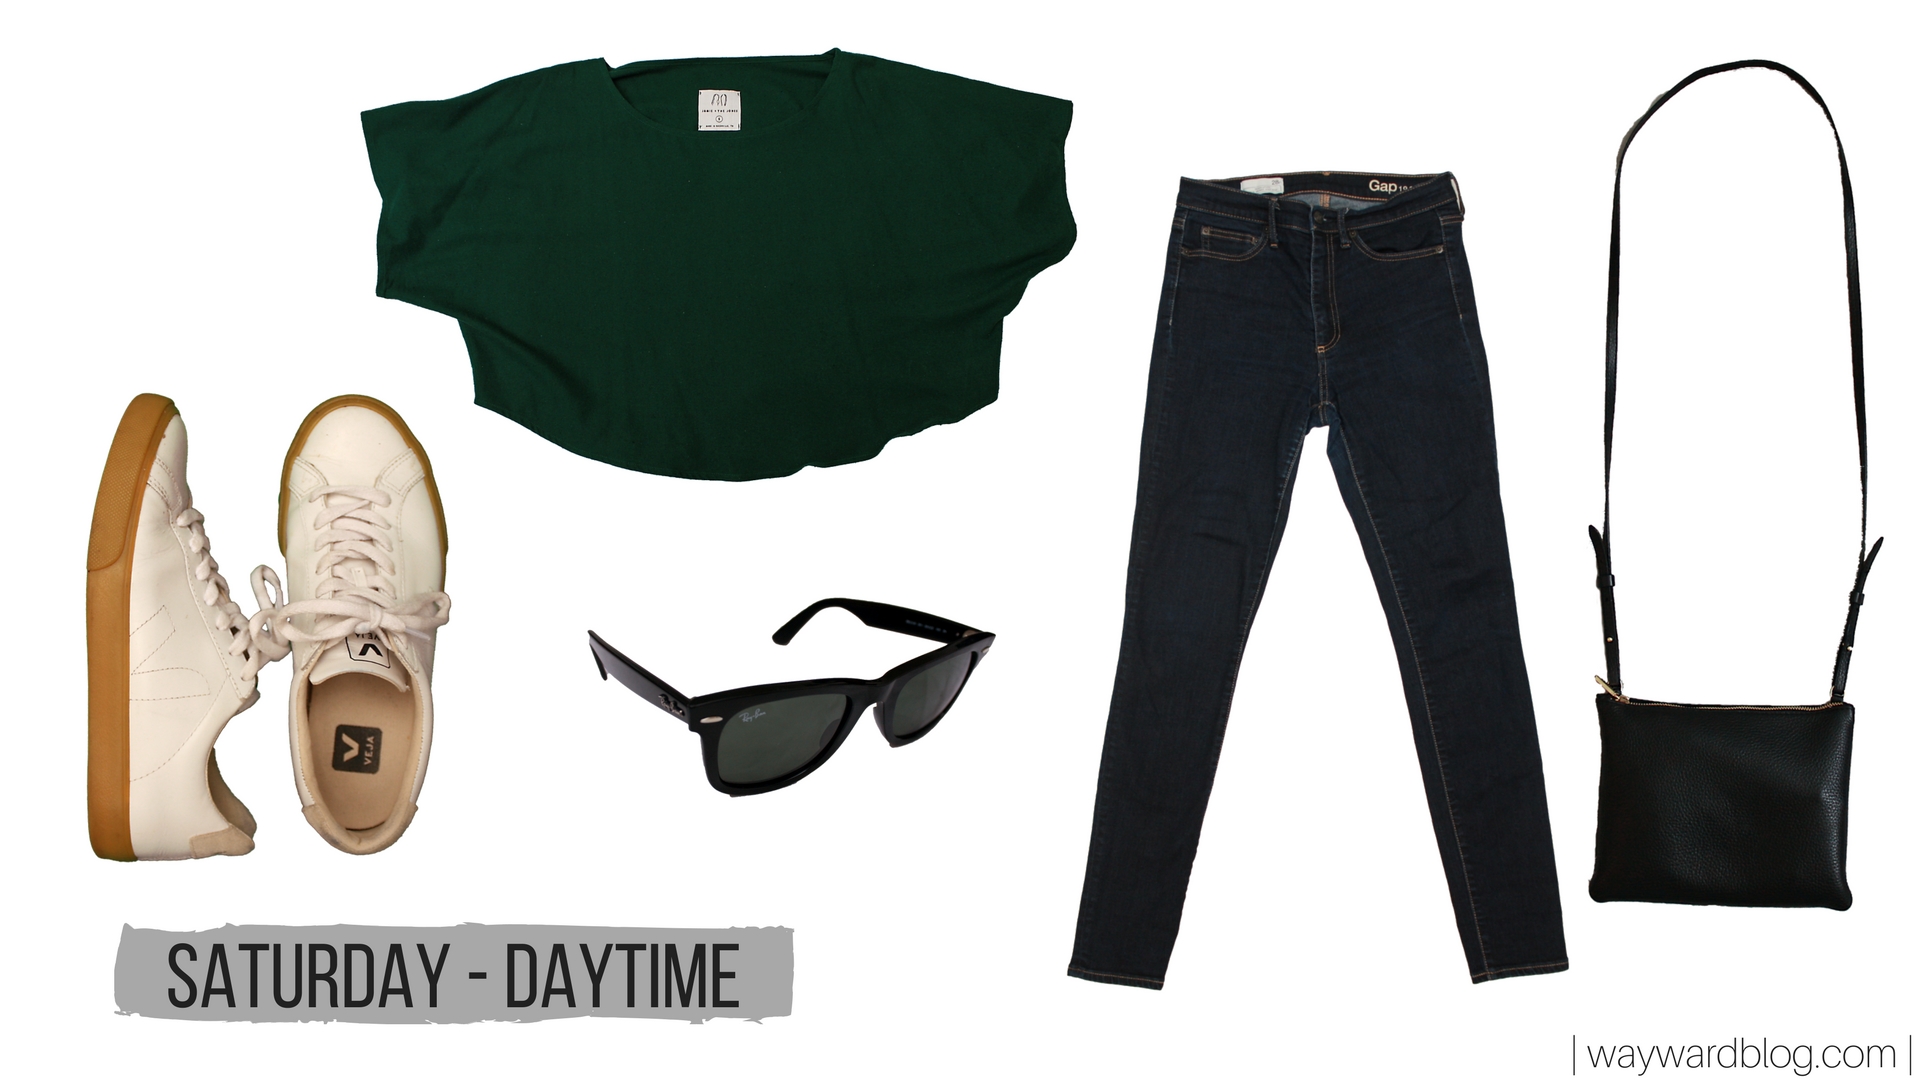 An outfit collage with a green top and blue jeans and sneakers